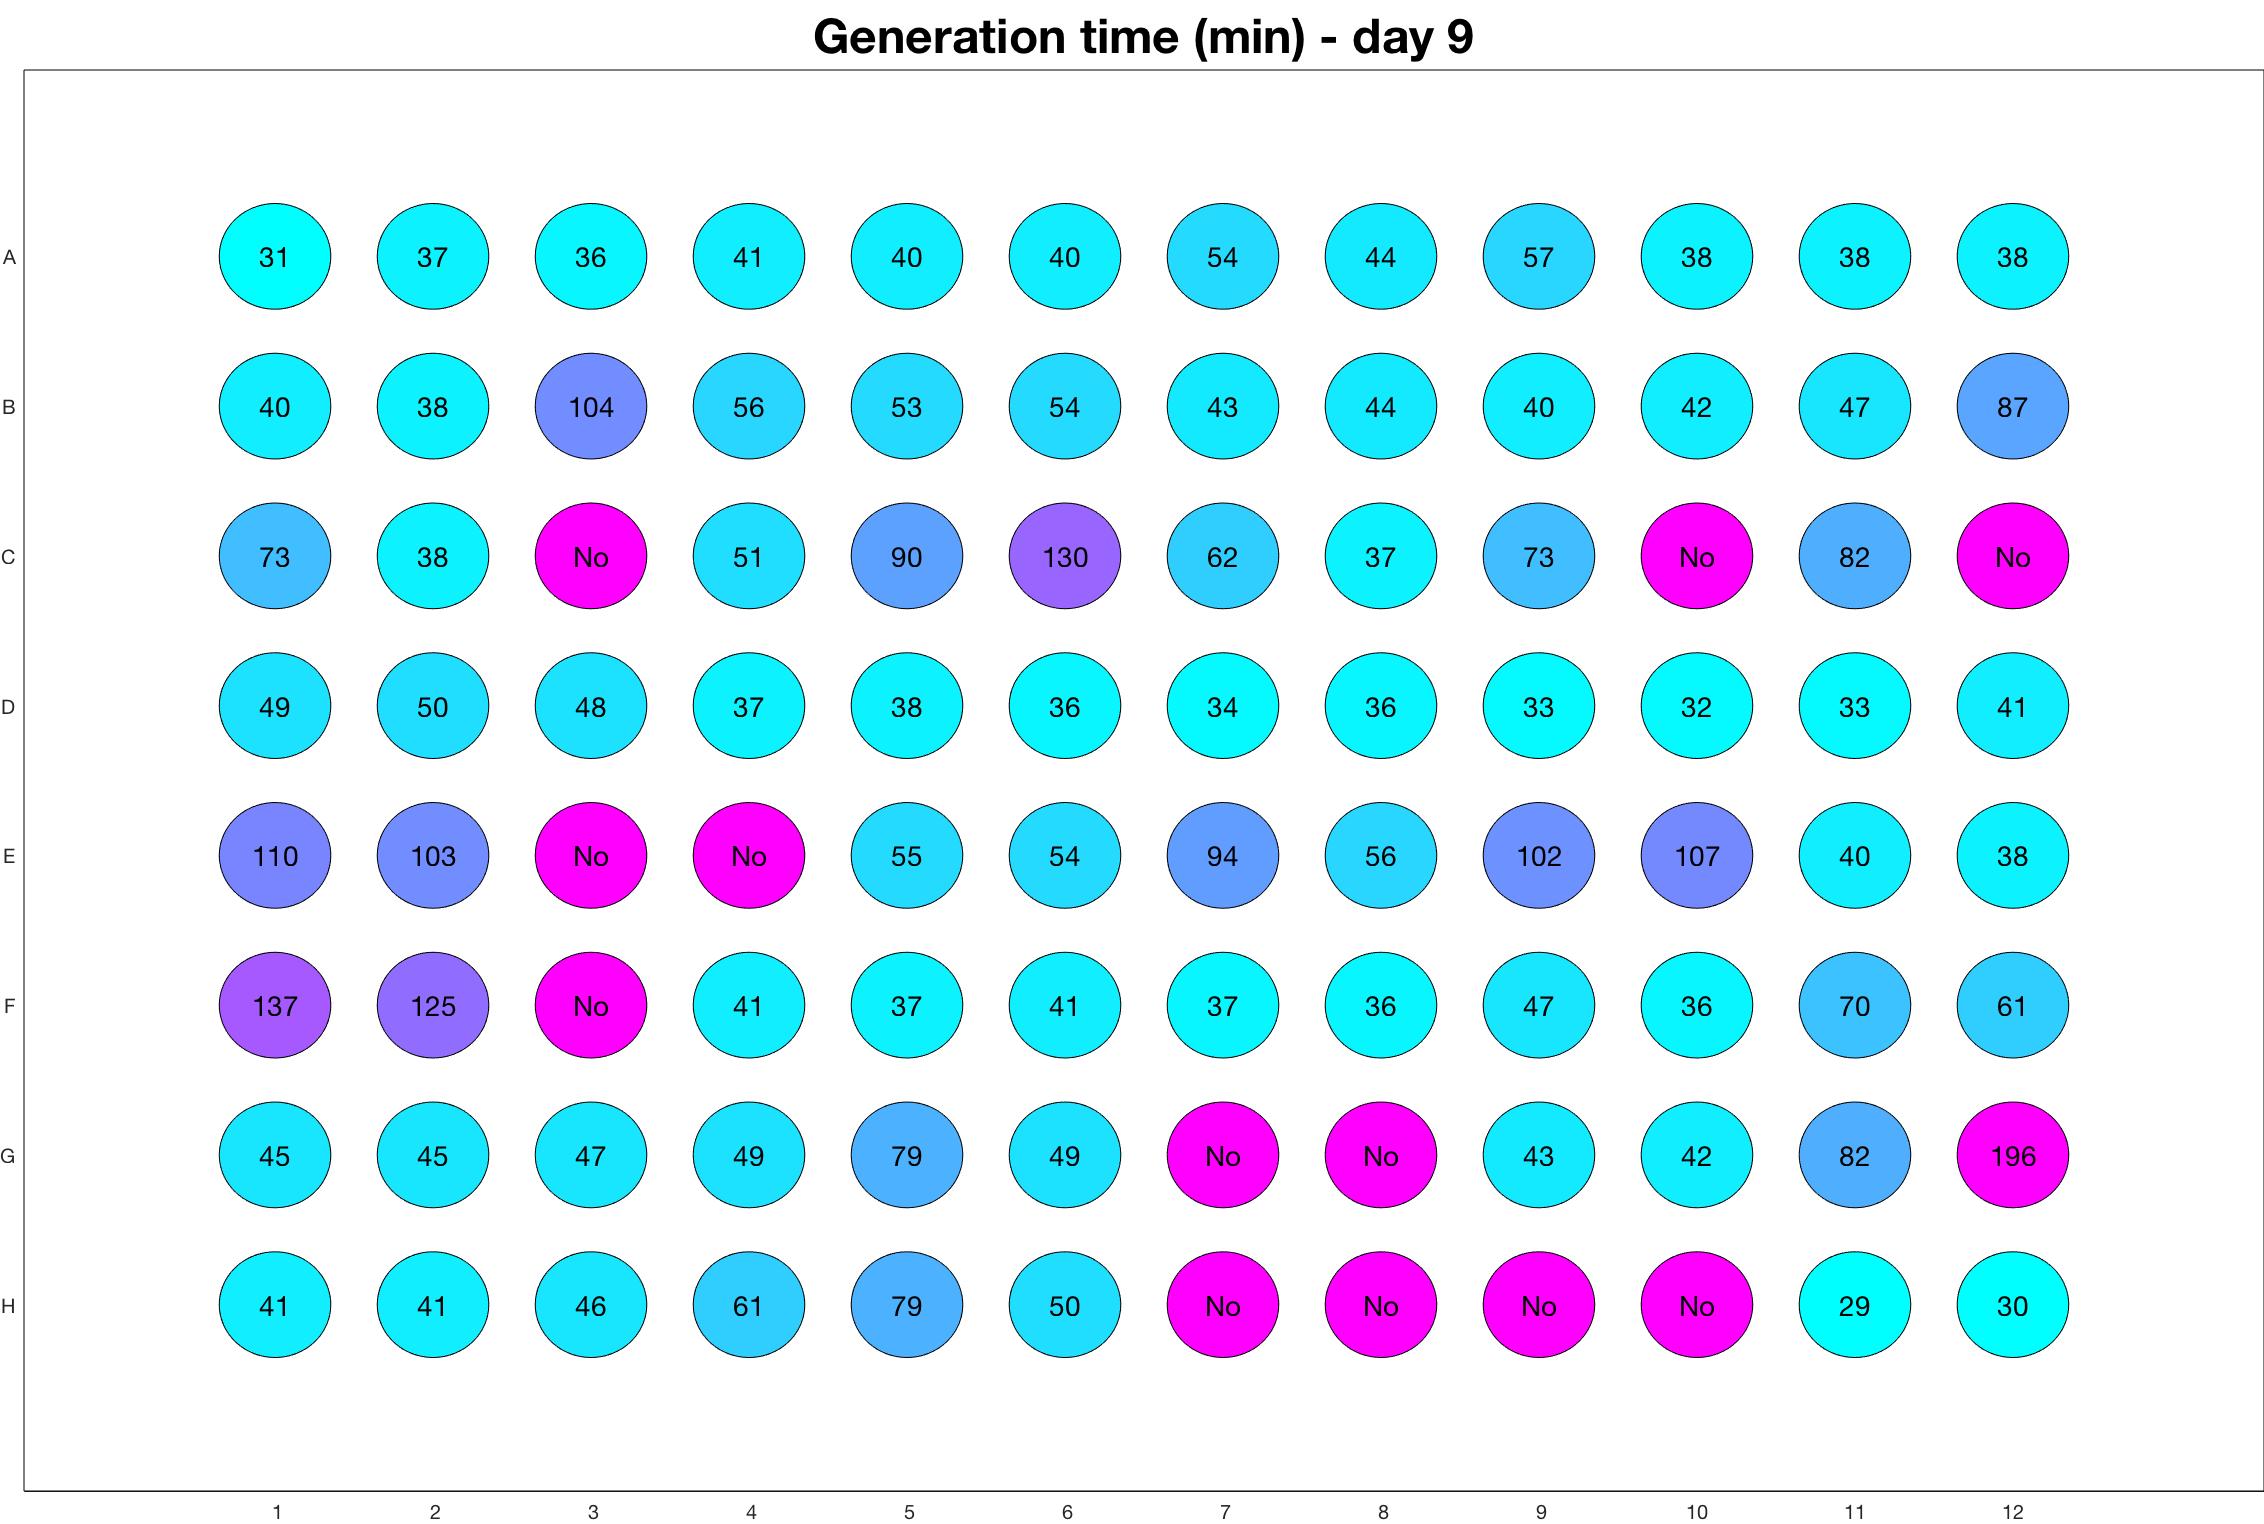 Generation time for day - 9.jpg